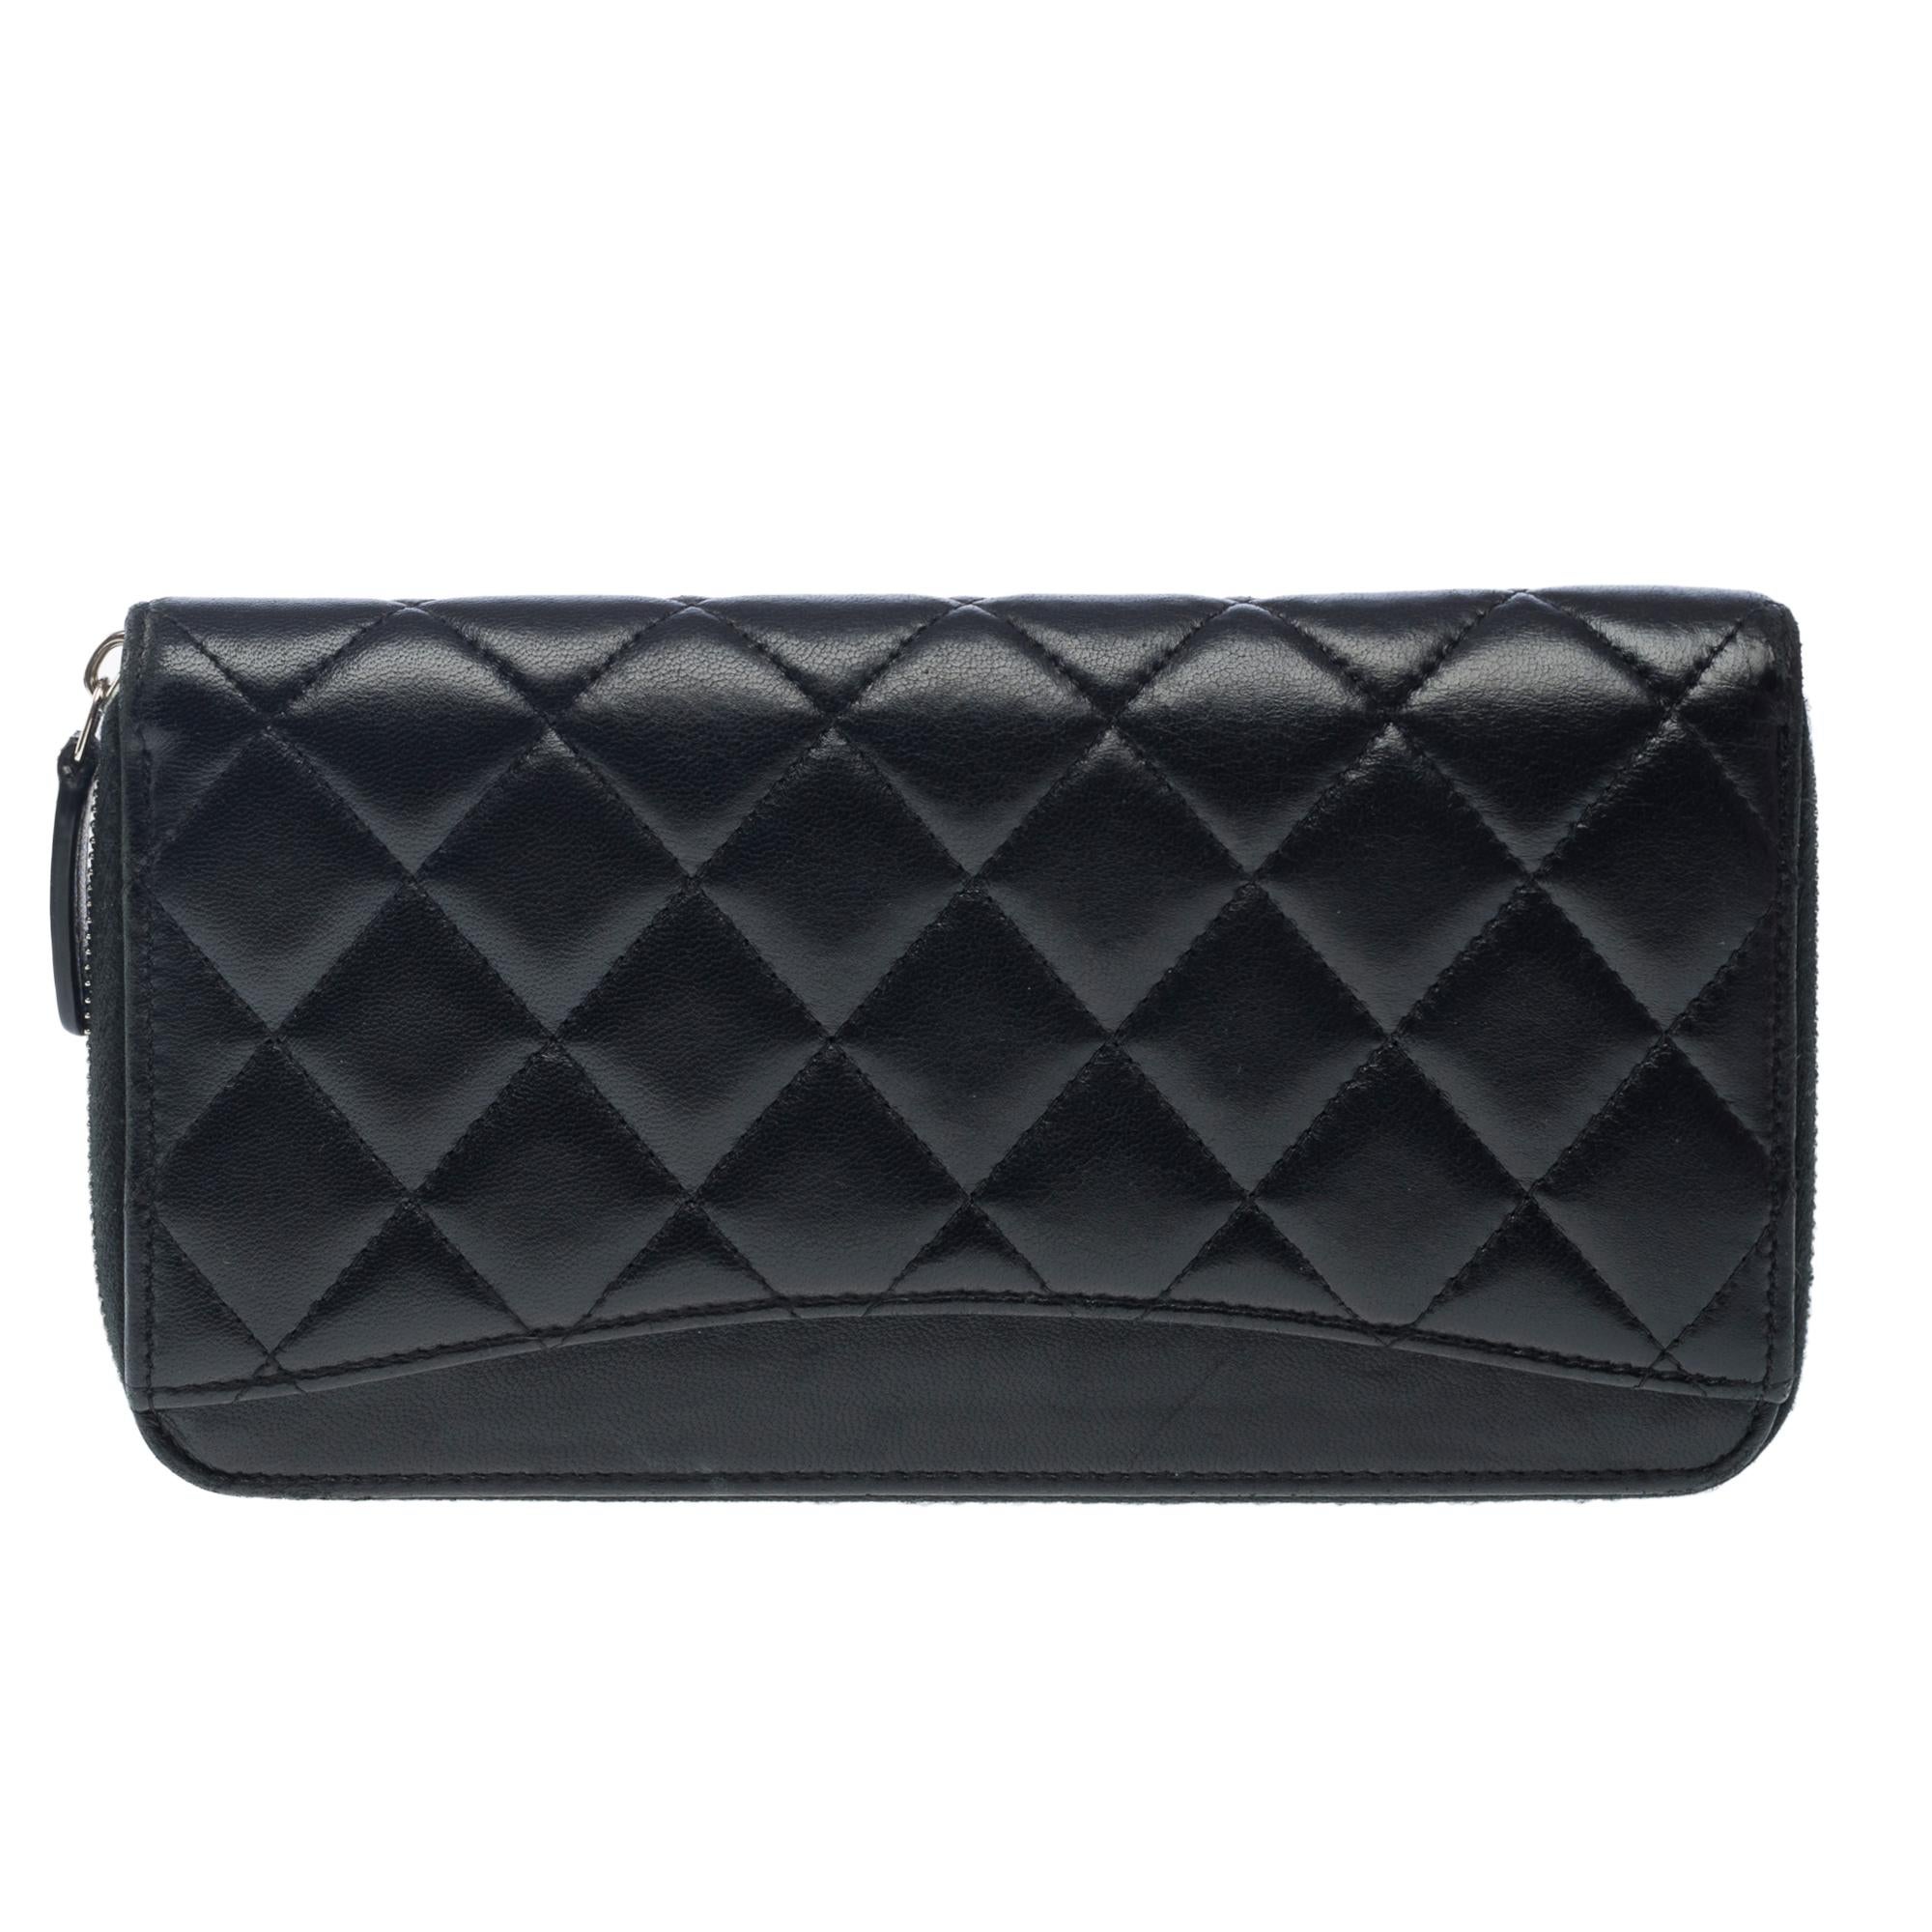 Women's Lovely Chanel Compagnon Wallet in black quilted lambskin leather, SHW For Sale